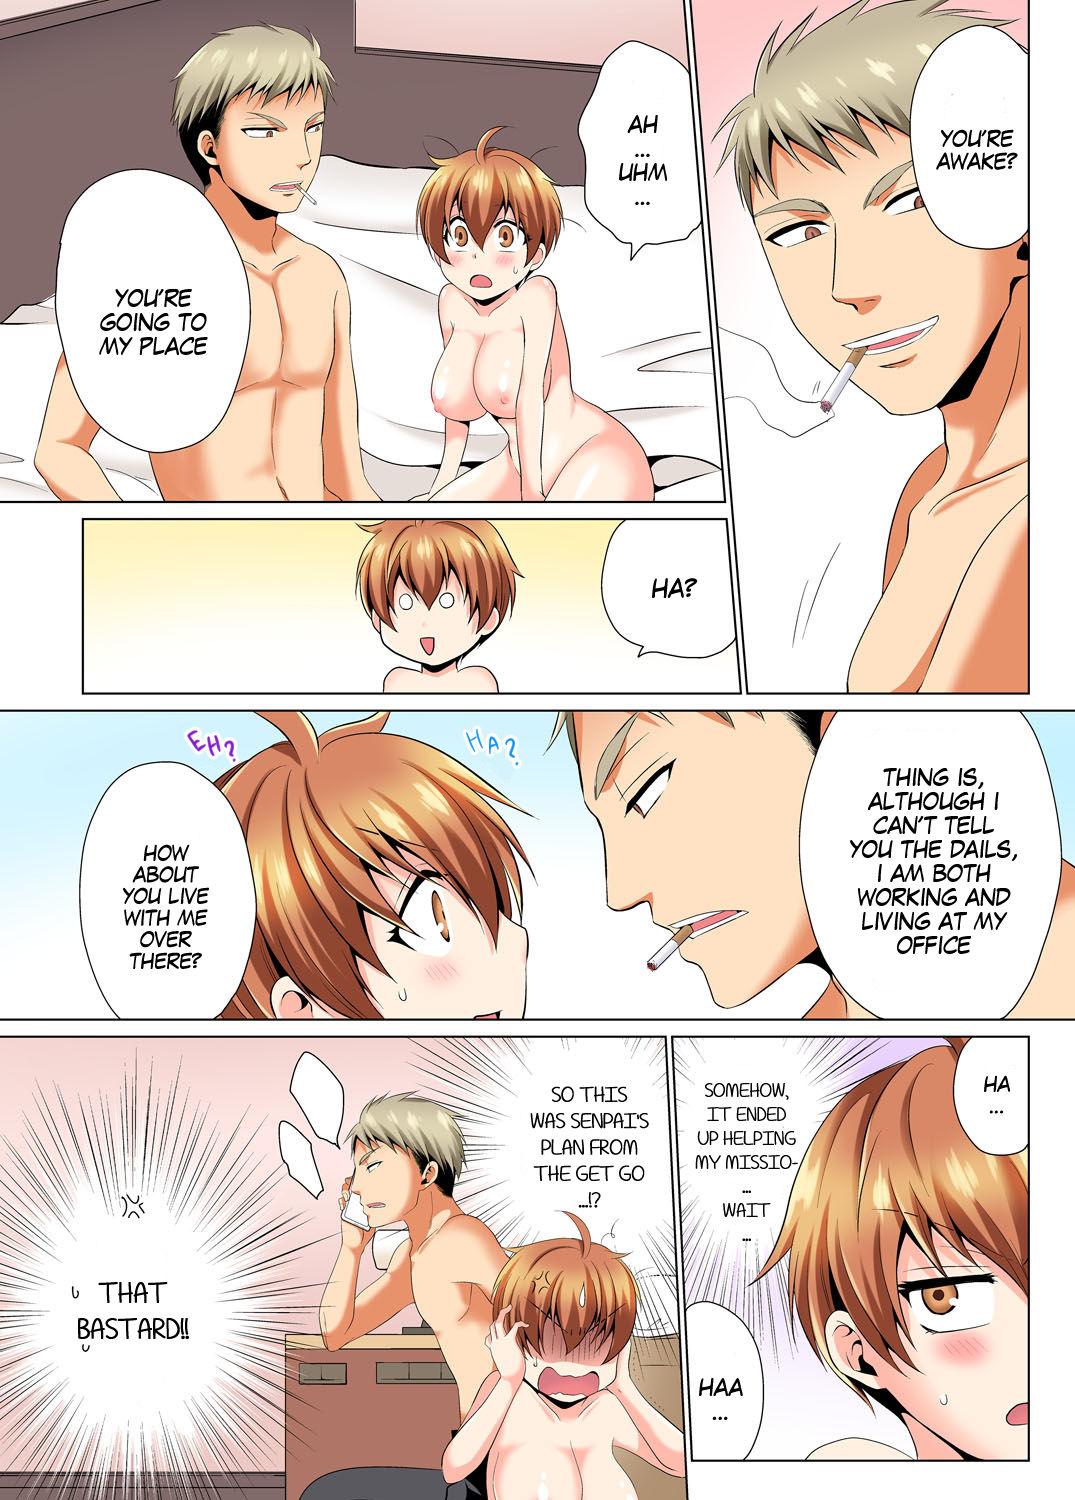 Nena Sexy Undercover Investigation! Don't spread it too much! Lewd TS Physical Examination Part 2 Classy - Page 13